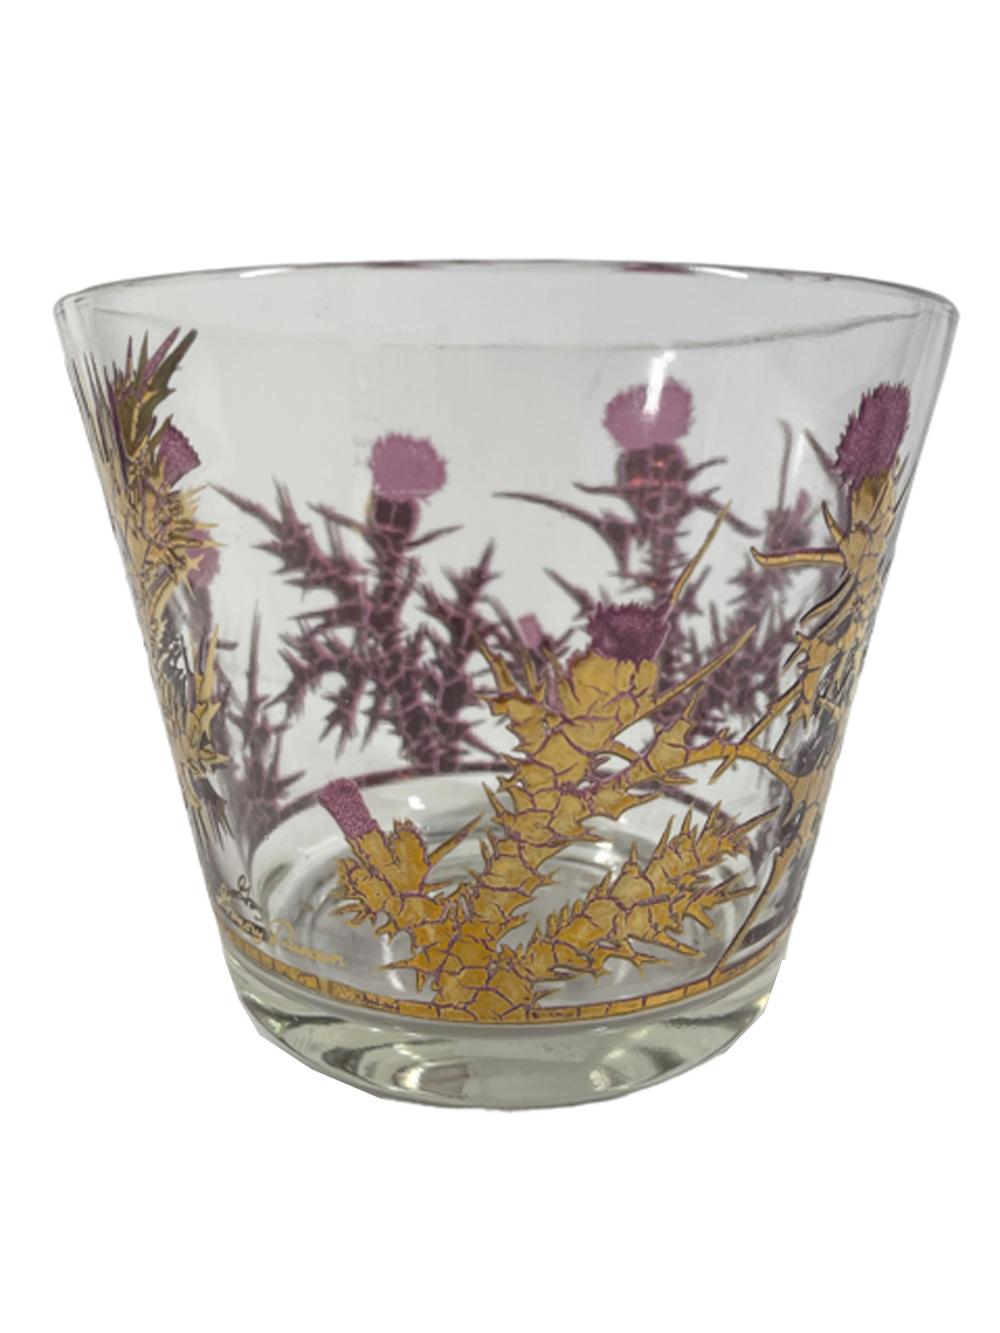 Mid-Century Modern ice bowl and four rocks designed by Gregory Duncan. Raised translucent purple enamel thistles covered in heavy 22 karat gold leaving only the purple top of the thistle bud visible on the exterior, through the interior the thistle